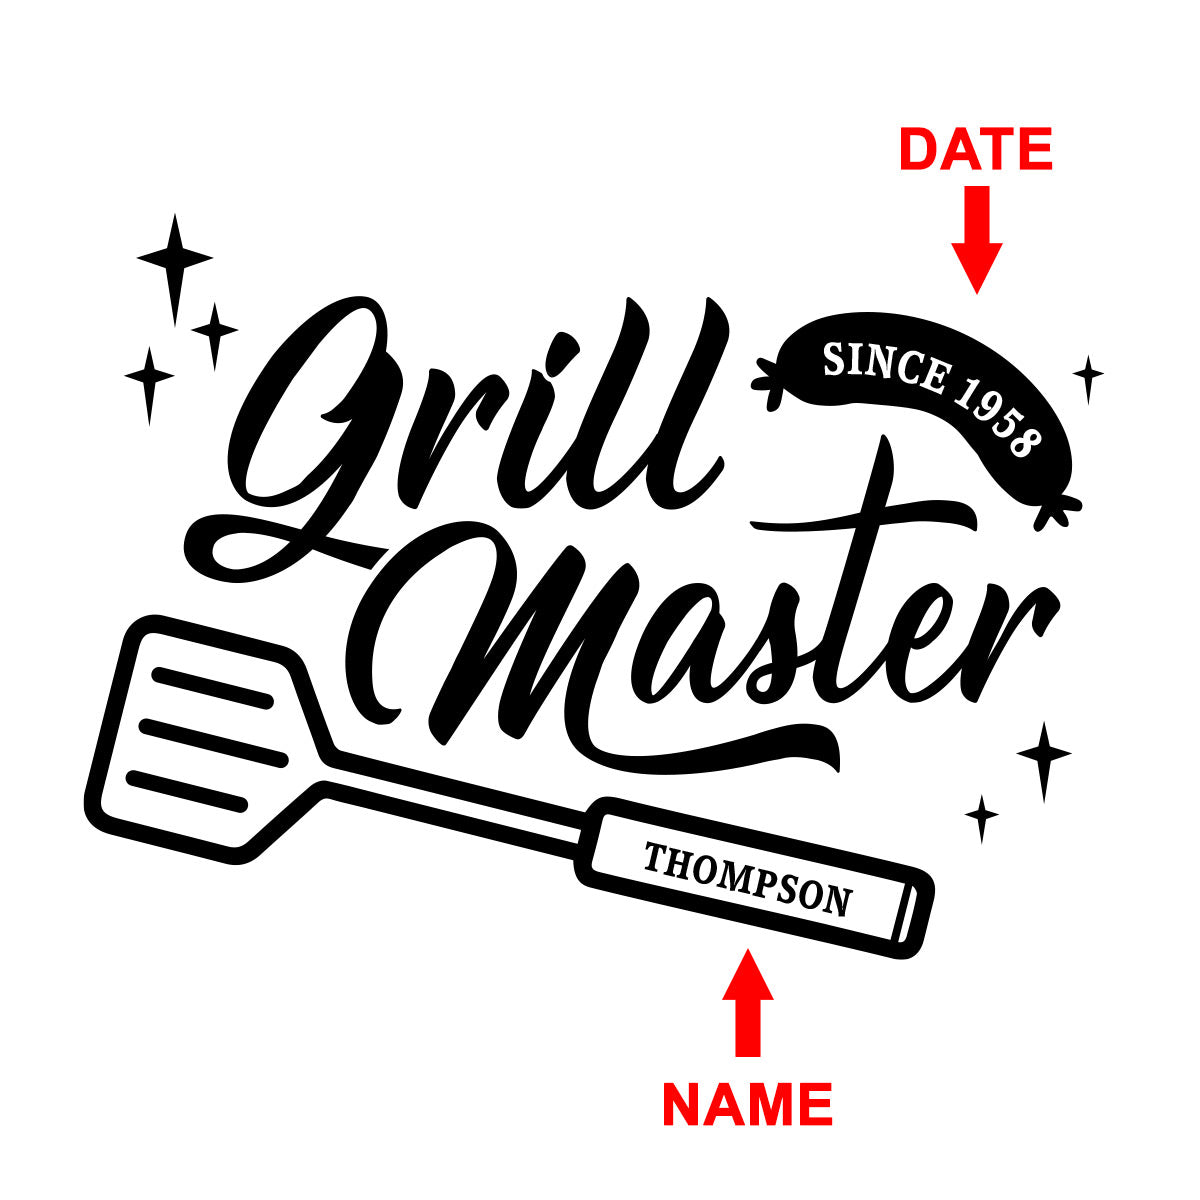 Personalized Grilling Tools Grill Master